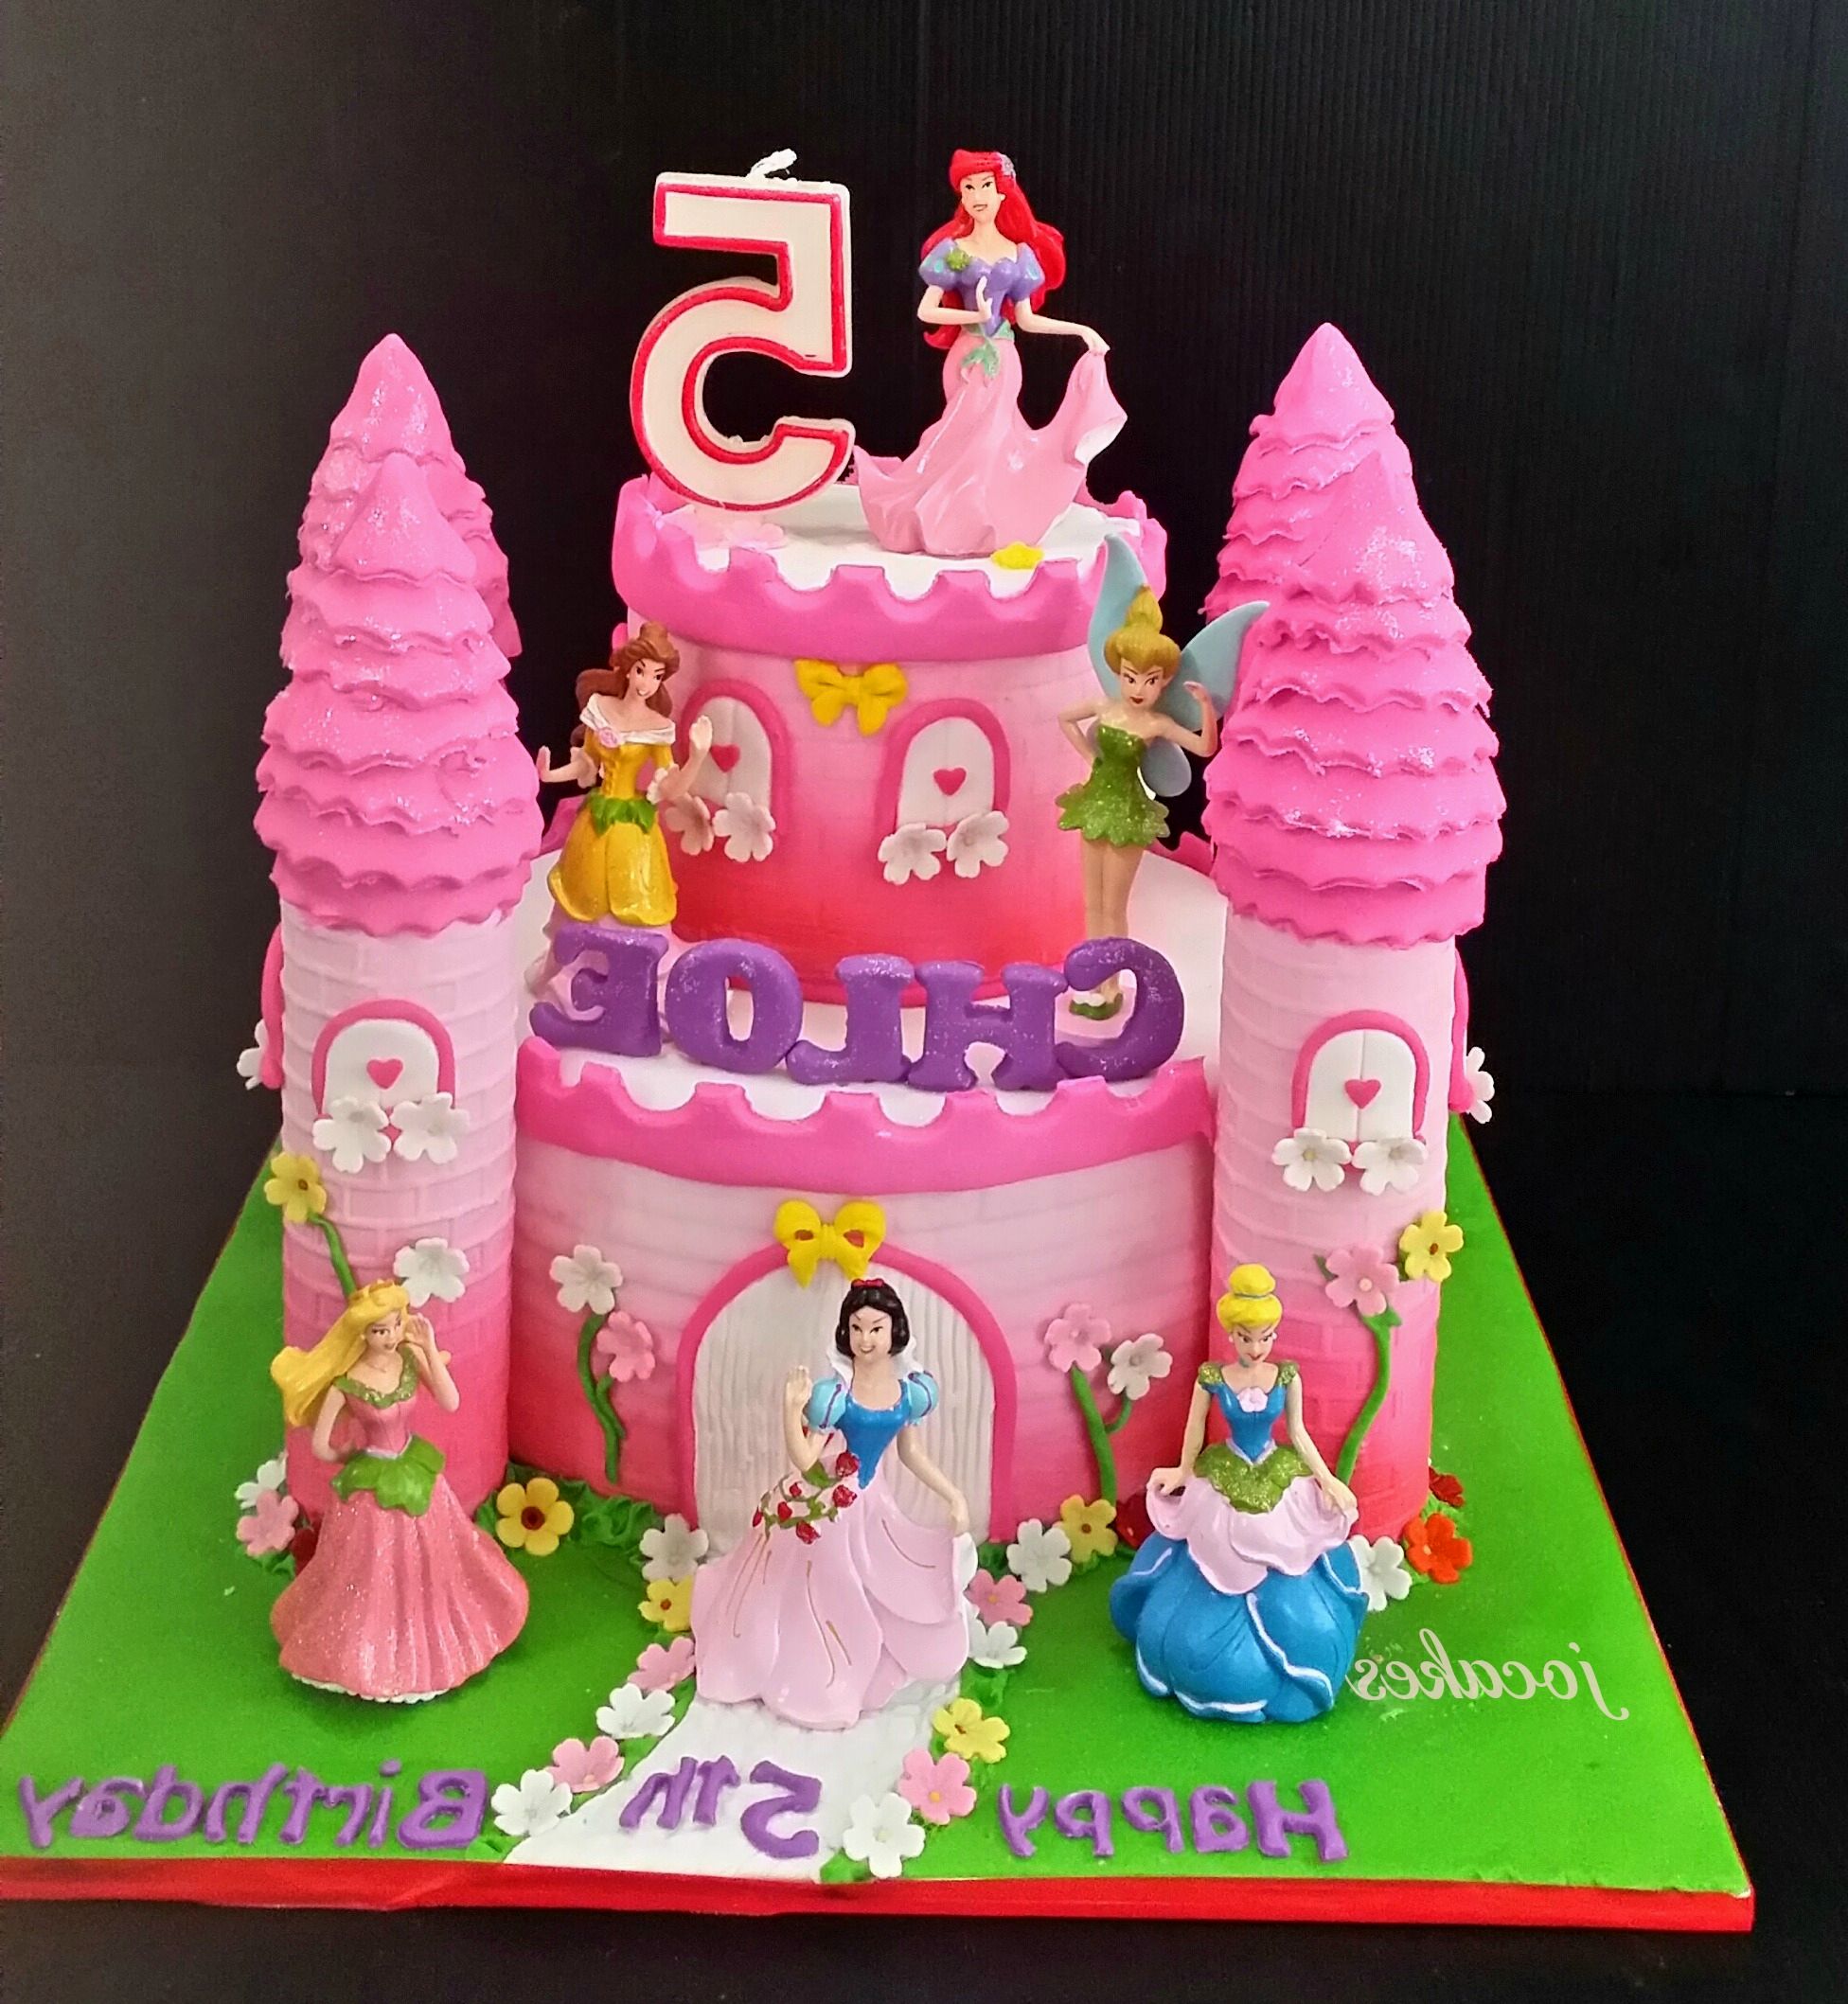 12 Fifth Birthday Cakes Girls Photo - Number 5 Birthday Cakes for Girls ...